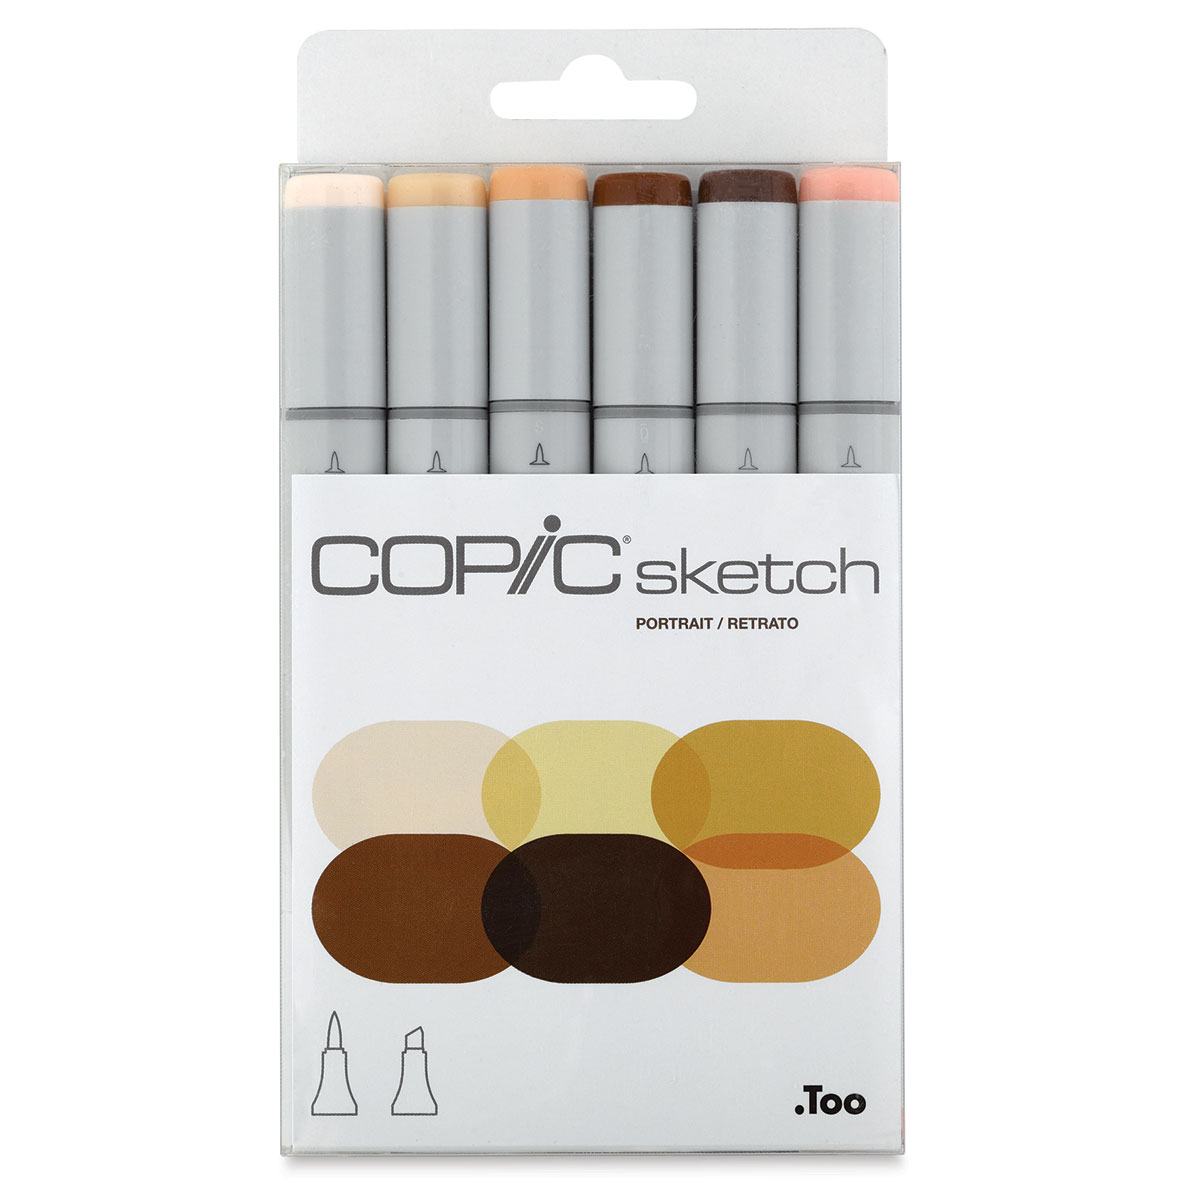 Copic - Sketch Marker - Phthalo Blue - B23